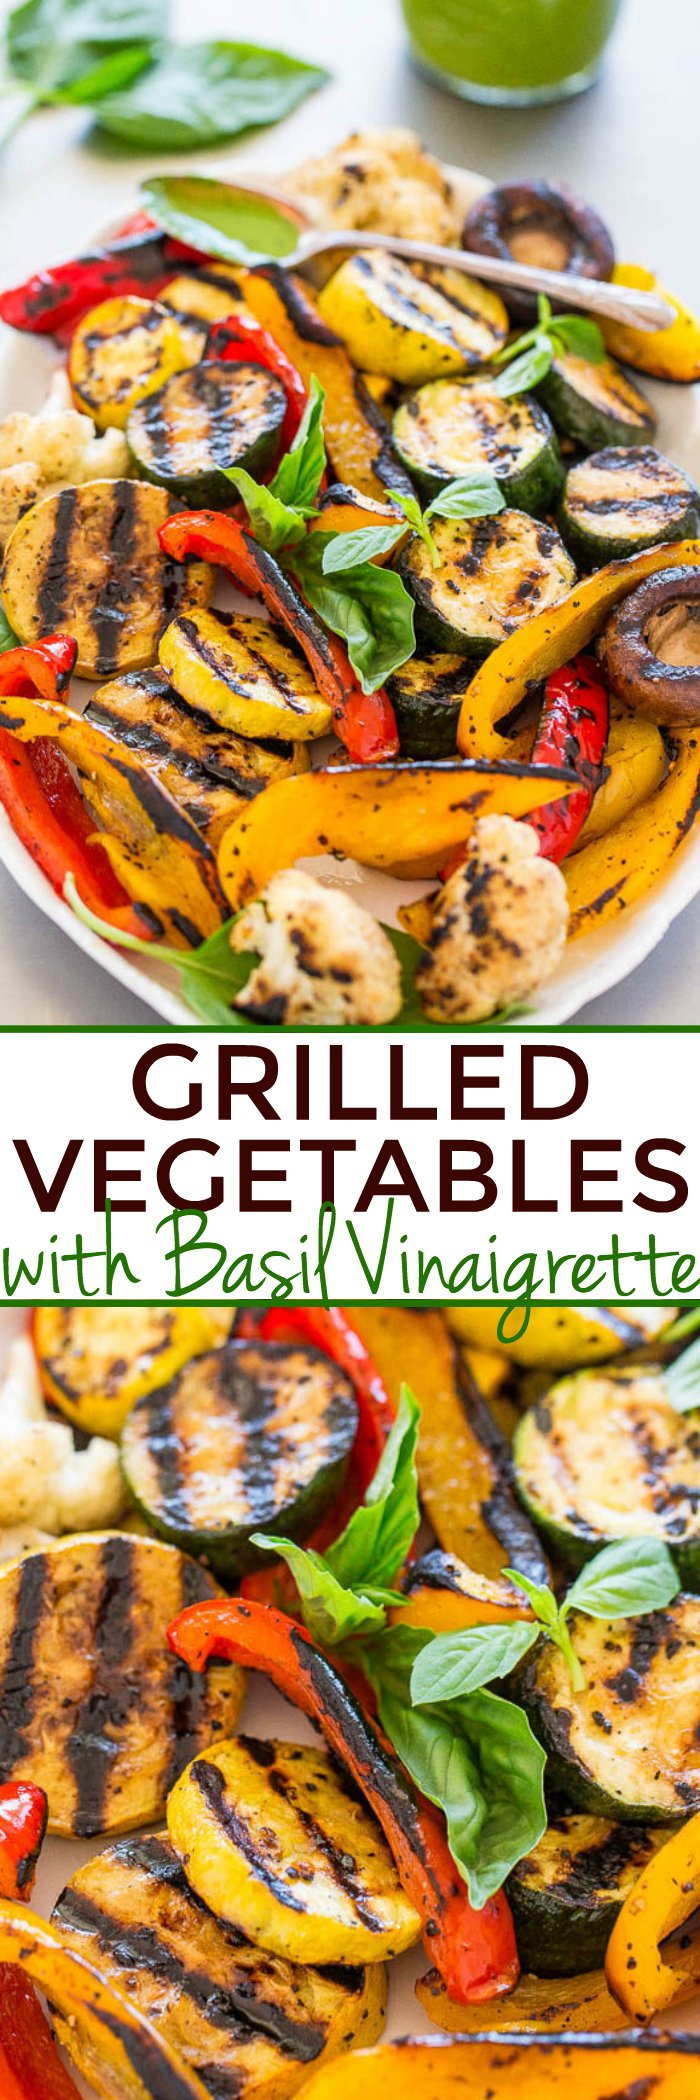 Grilled Vegetables with Basil Vinaigrette - Grilling gives these simply prepared vegetables the perfect amount of SMOKY flavor!! The basil vinaigrette is LOADED with layers of flavor and ready in 1 minute! Healthy, fast, EASY, minimal cleanup = the PERFECT recipe!!